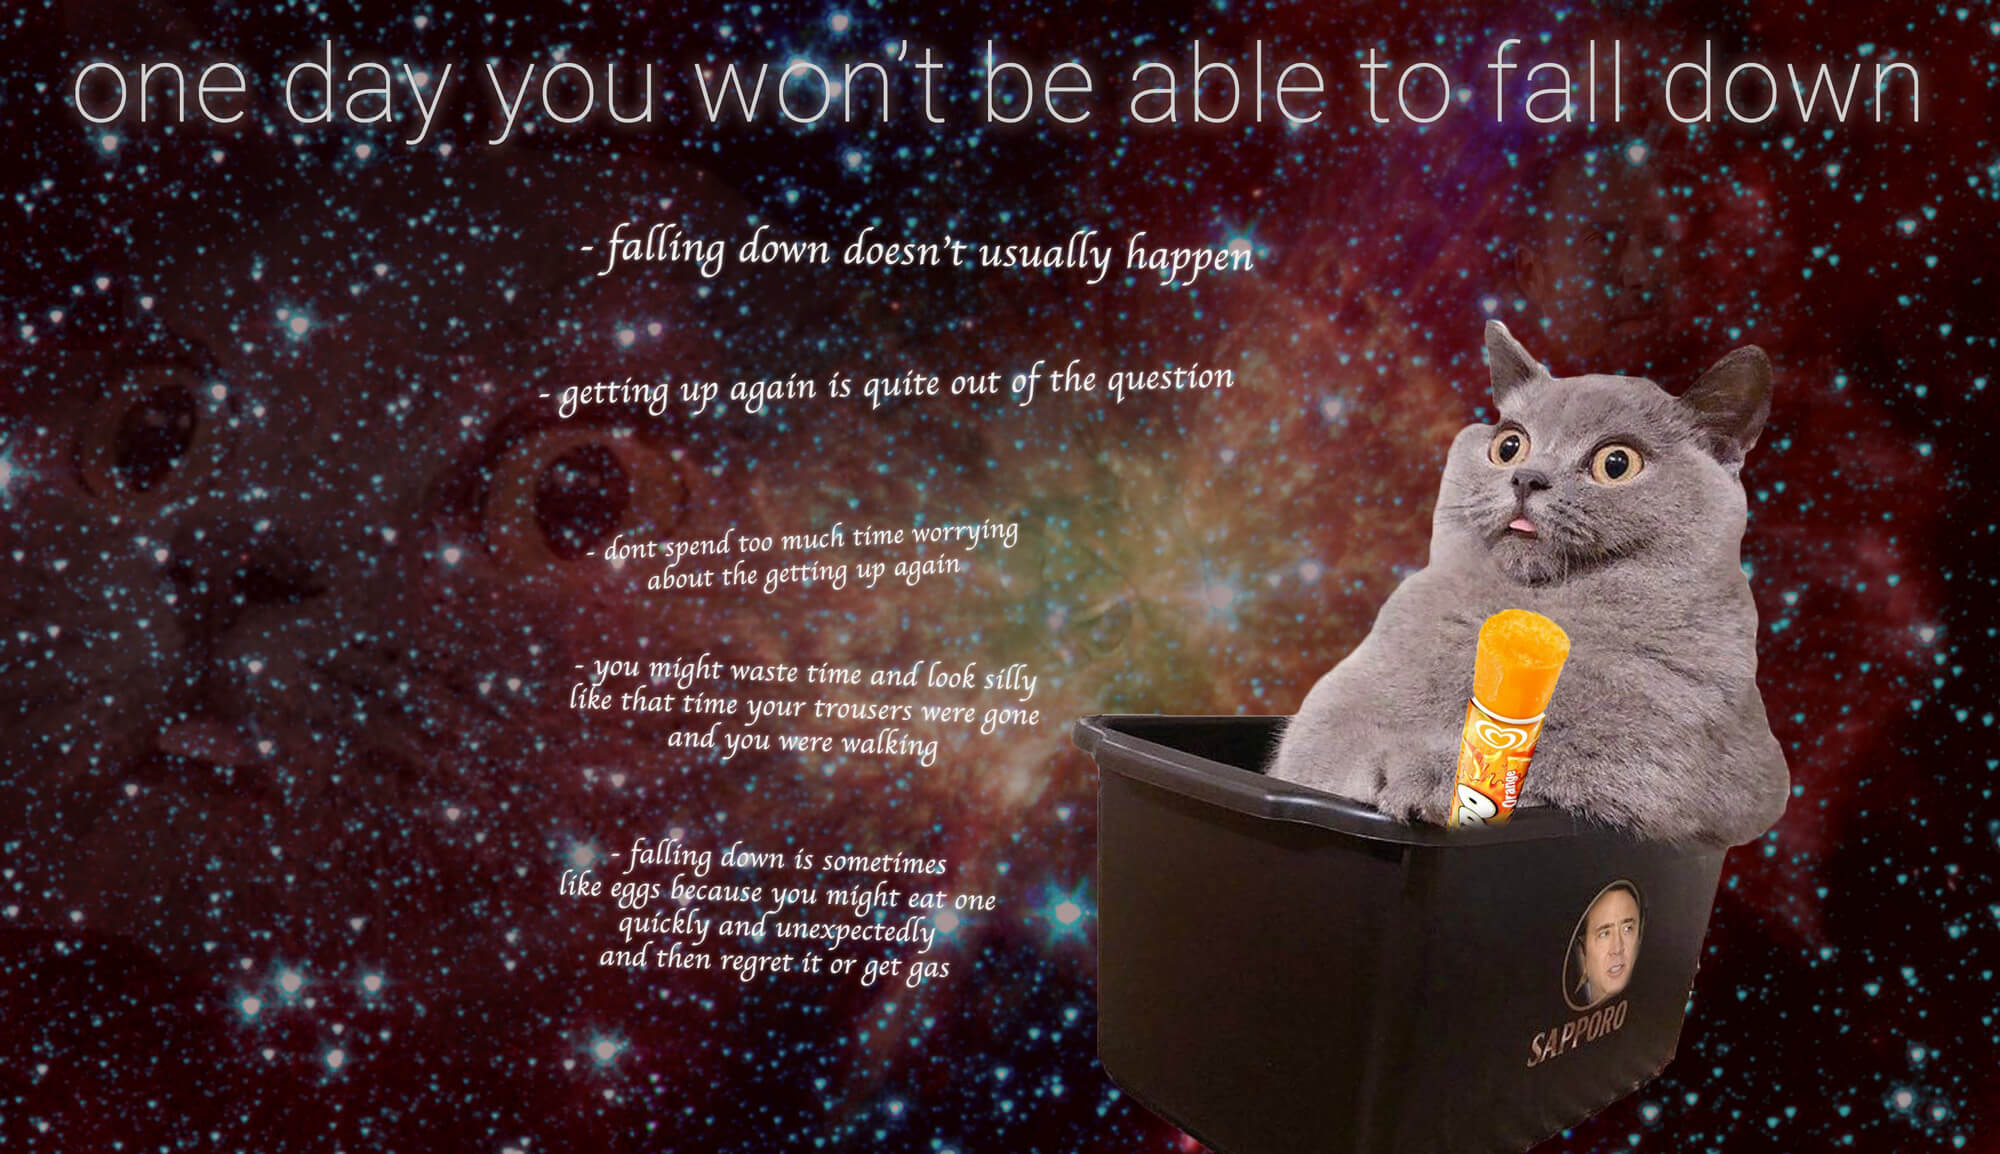 Space Blep Cat - one day you will never fall down again